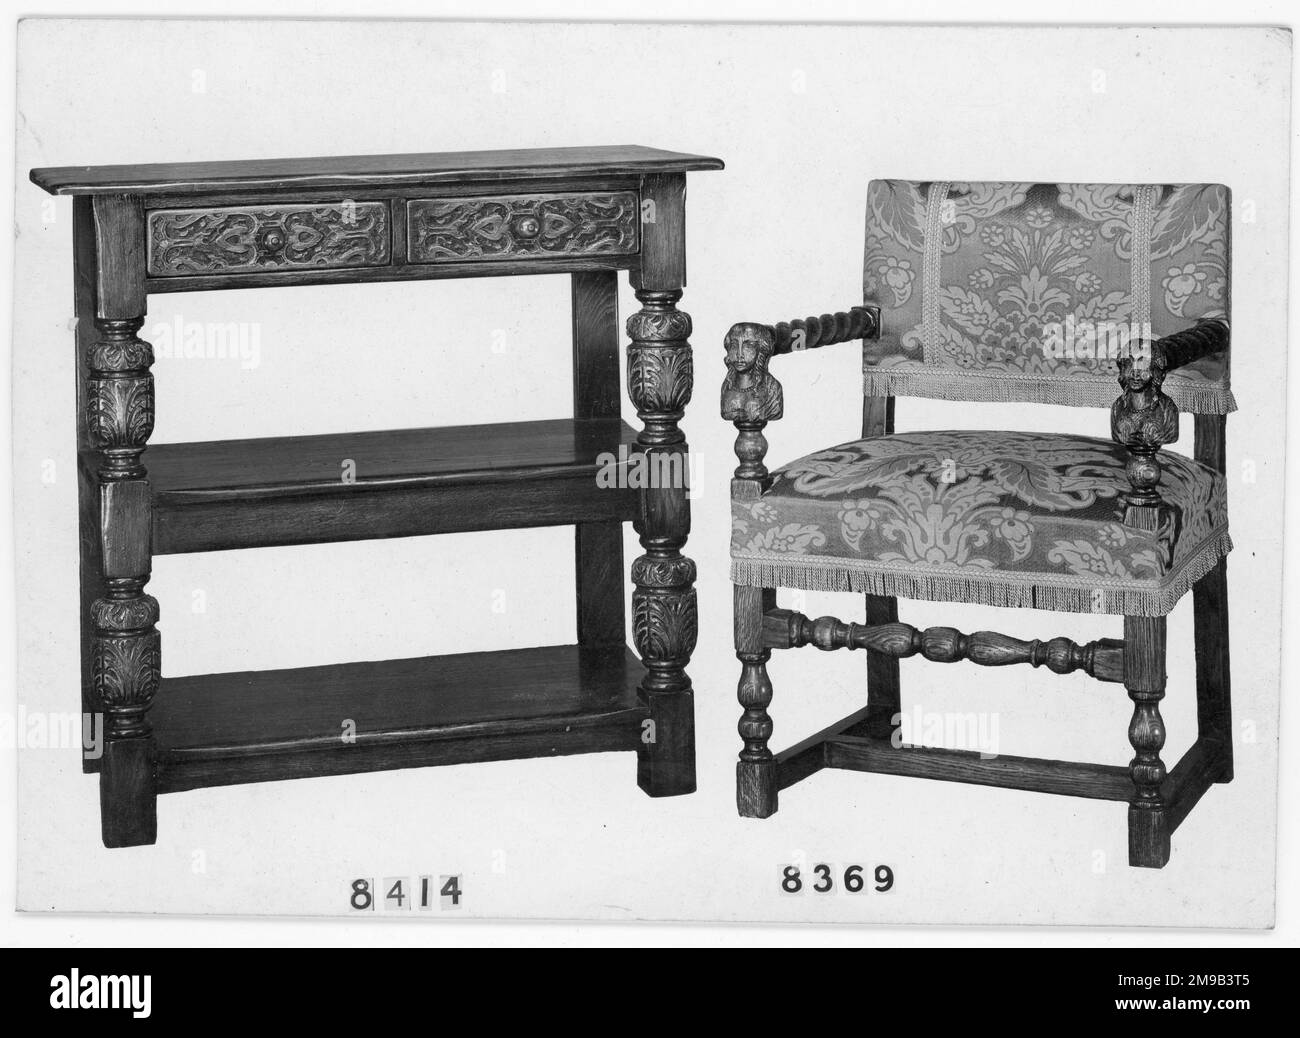 Table and chair from a furniture showroom catalogue, numbered as number 8414 and number 8369, respectively. Stock Photo